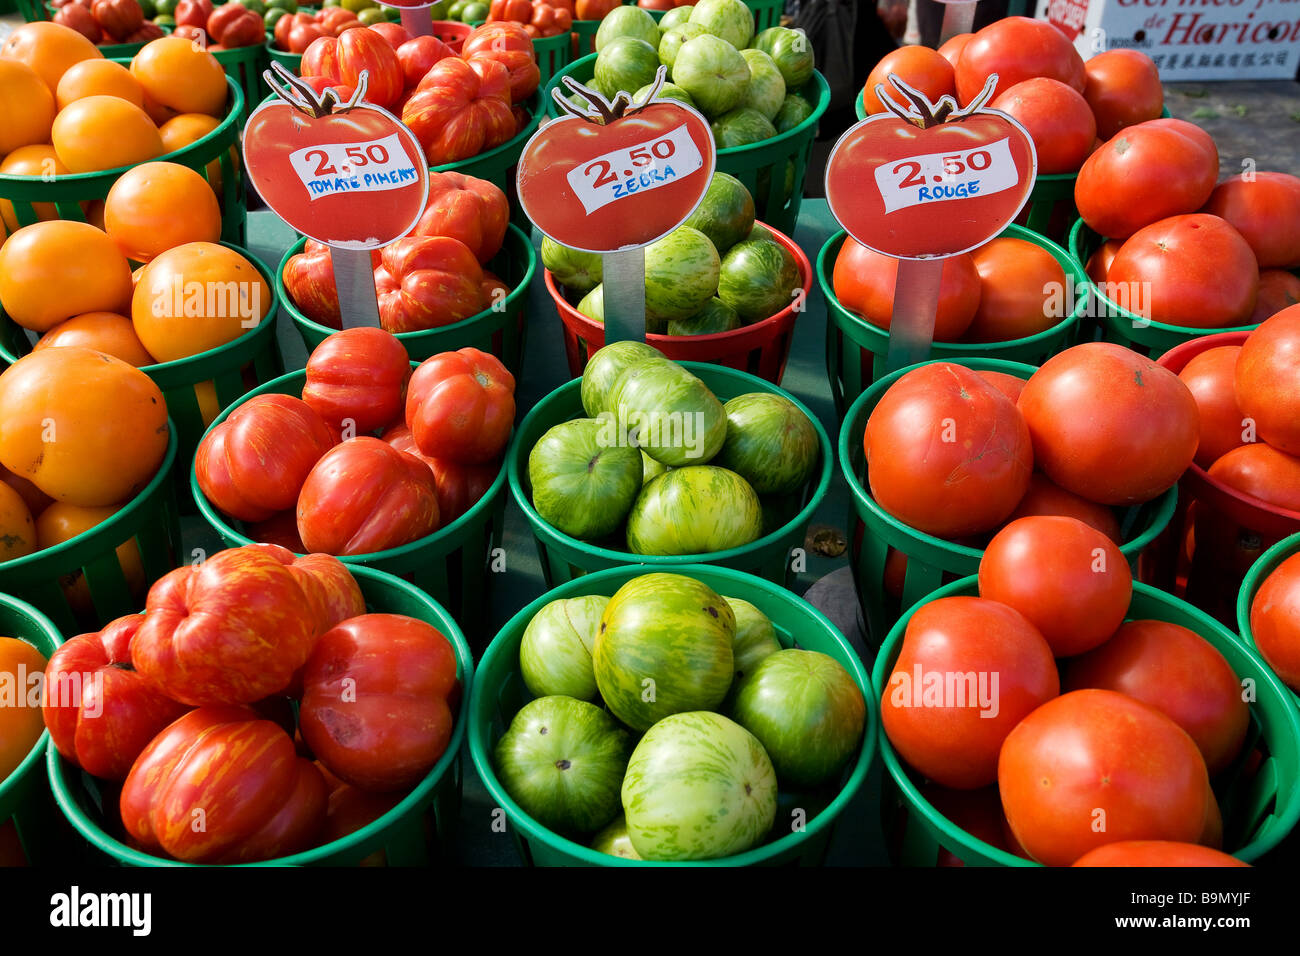 Canada, Quebec Province, Montreal, Jean Talon Market in Little Italy District, tomatoes Stock Photo